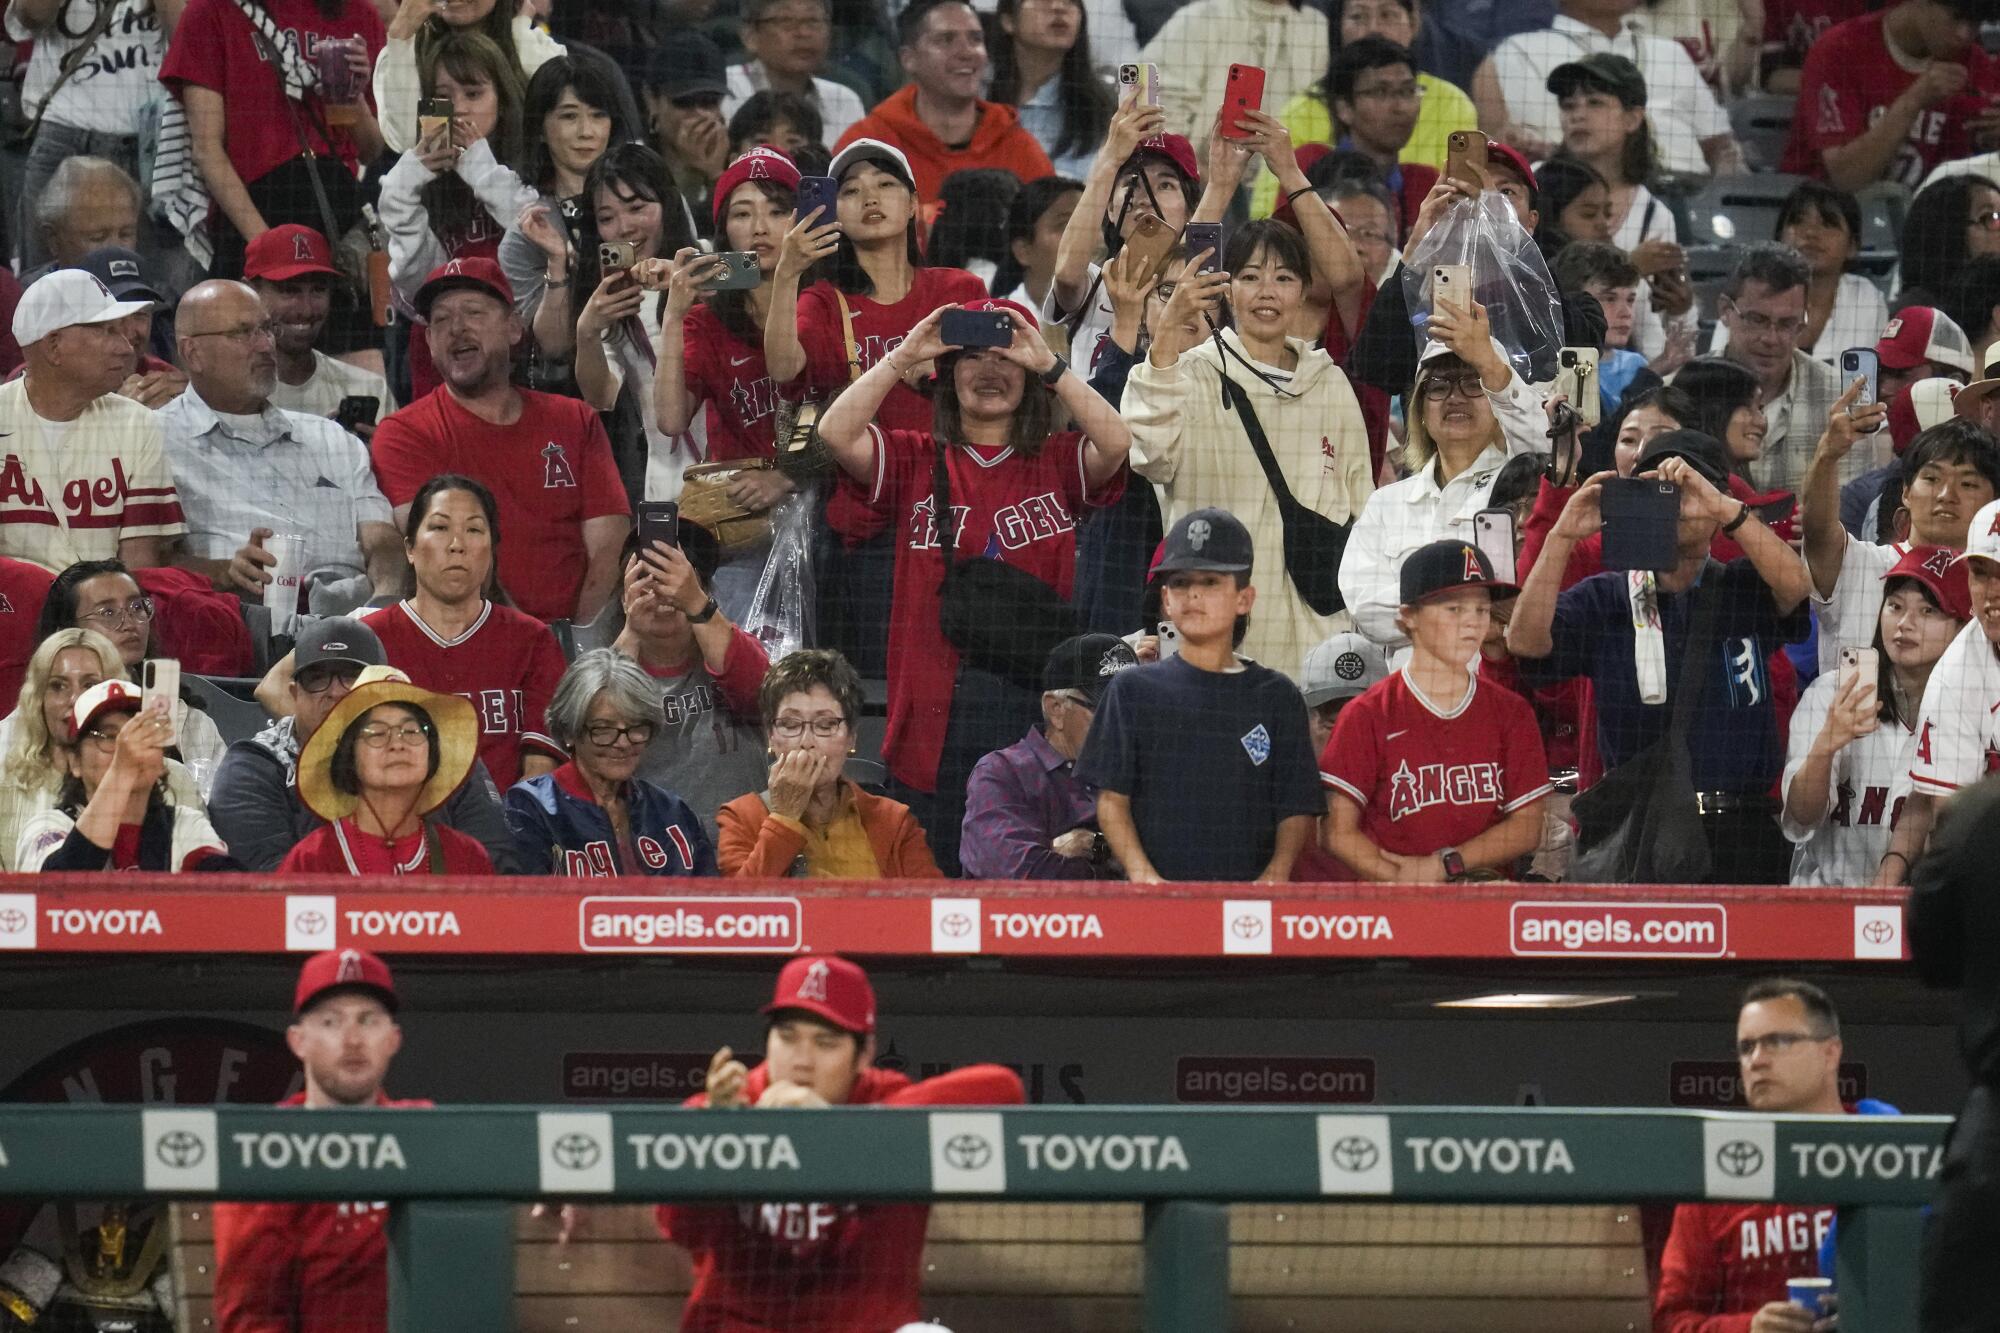 Fans take photos of Shohei Ohtani, bottom center, during a game against the Tigers on Sept. 16.